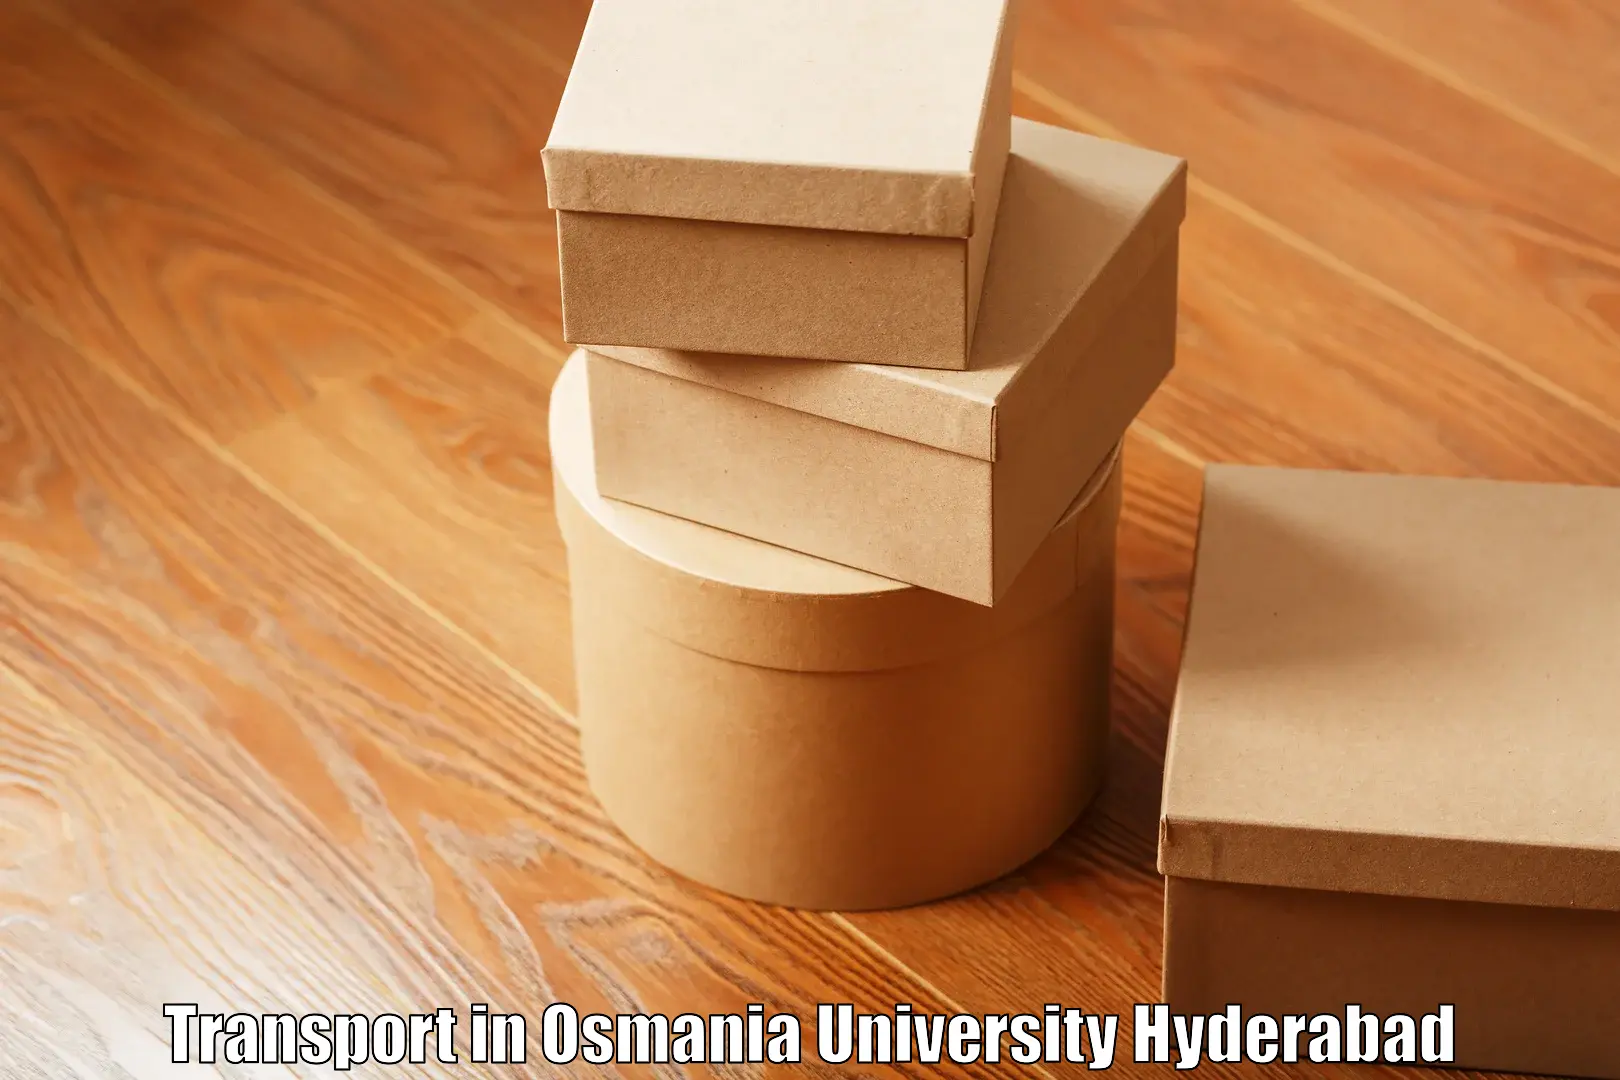 Daily parcel service transport in Osmania University Hyderabad